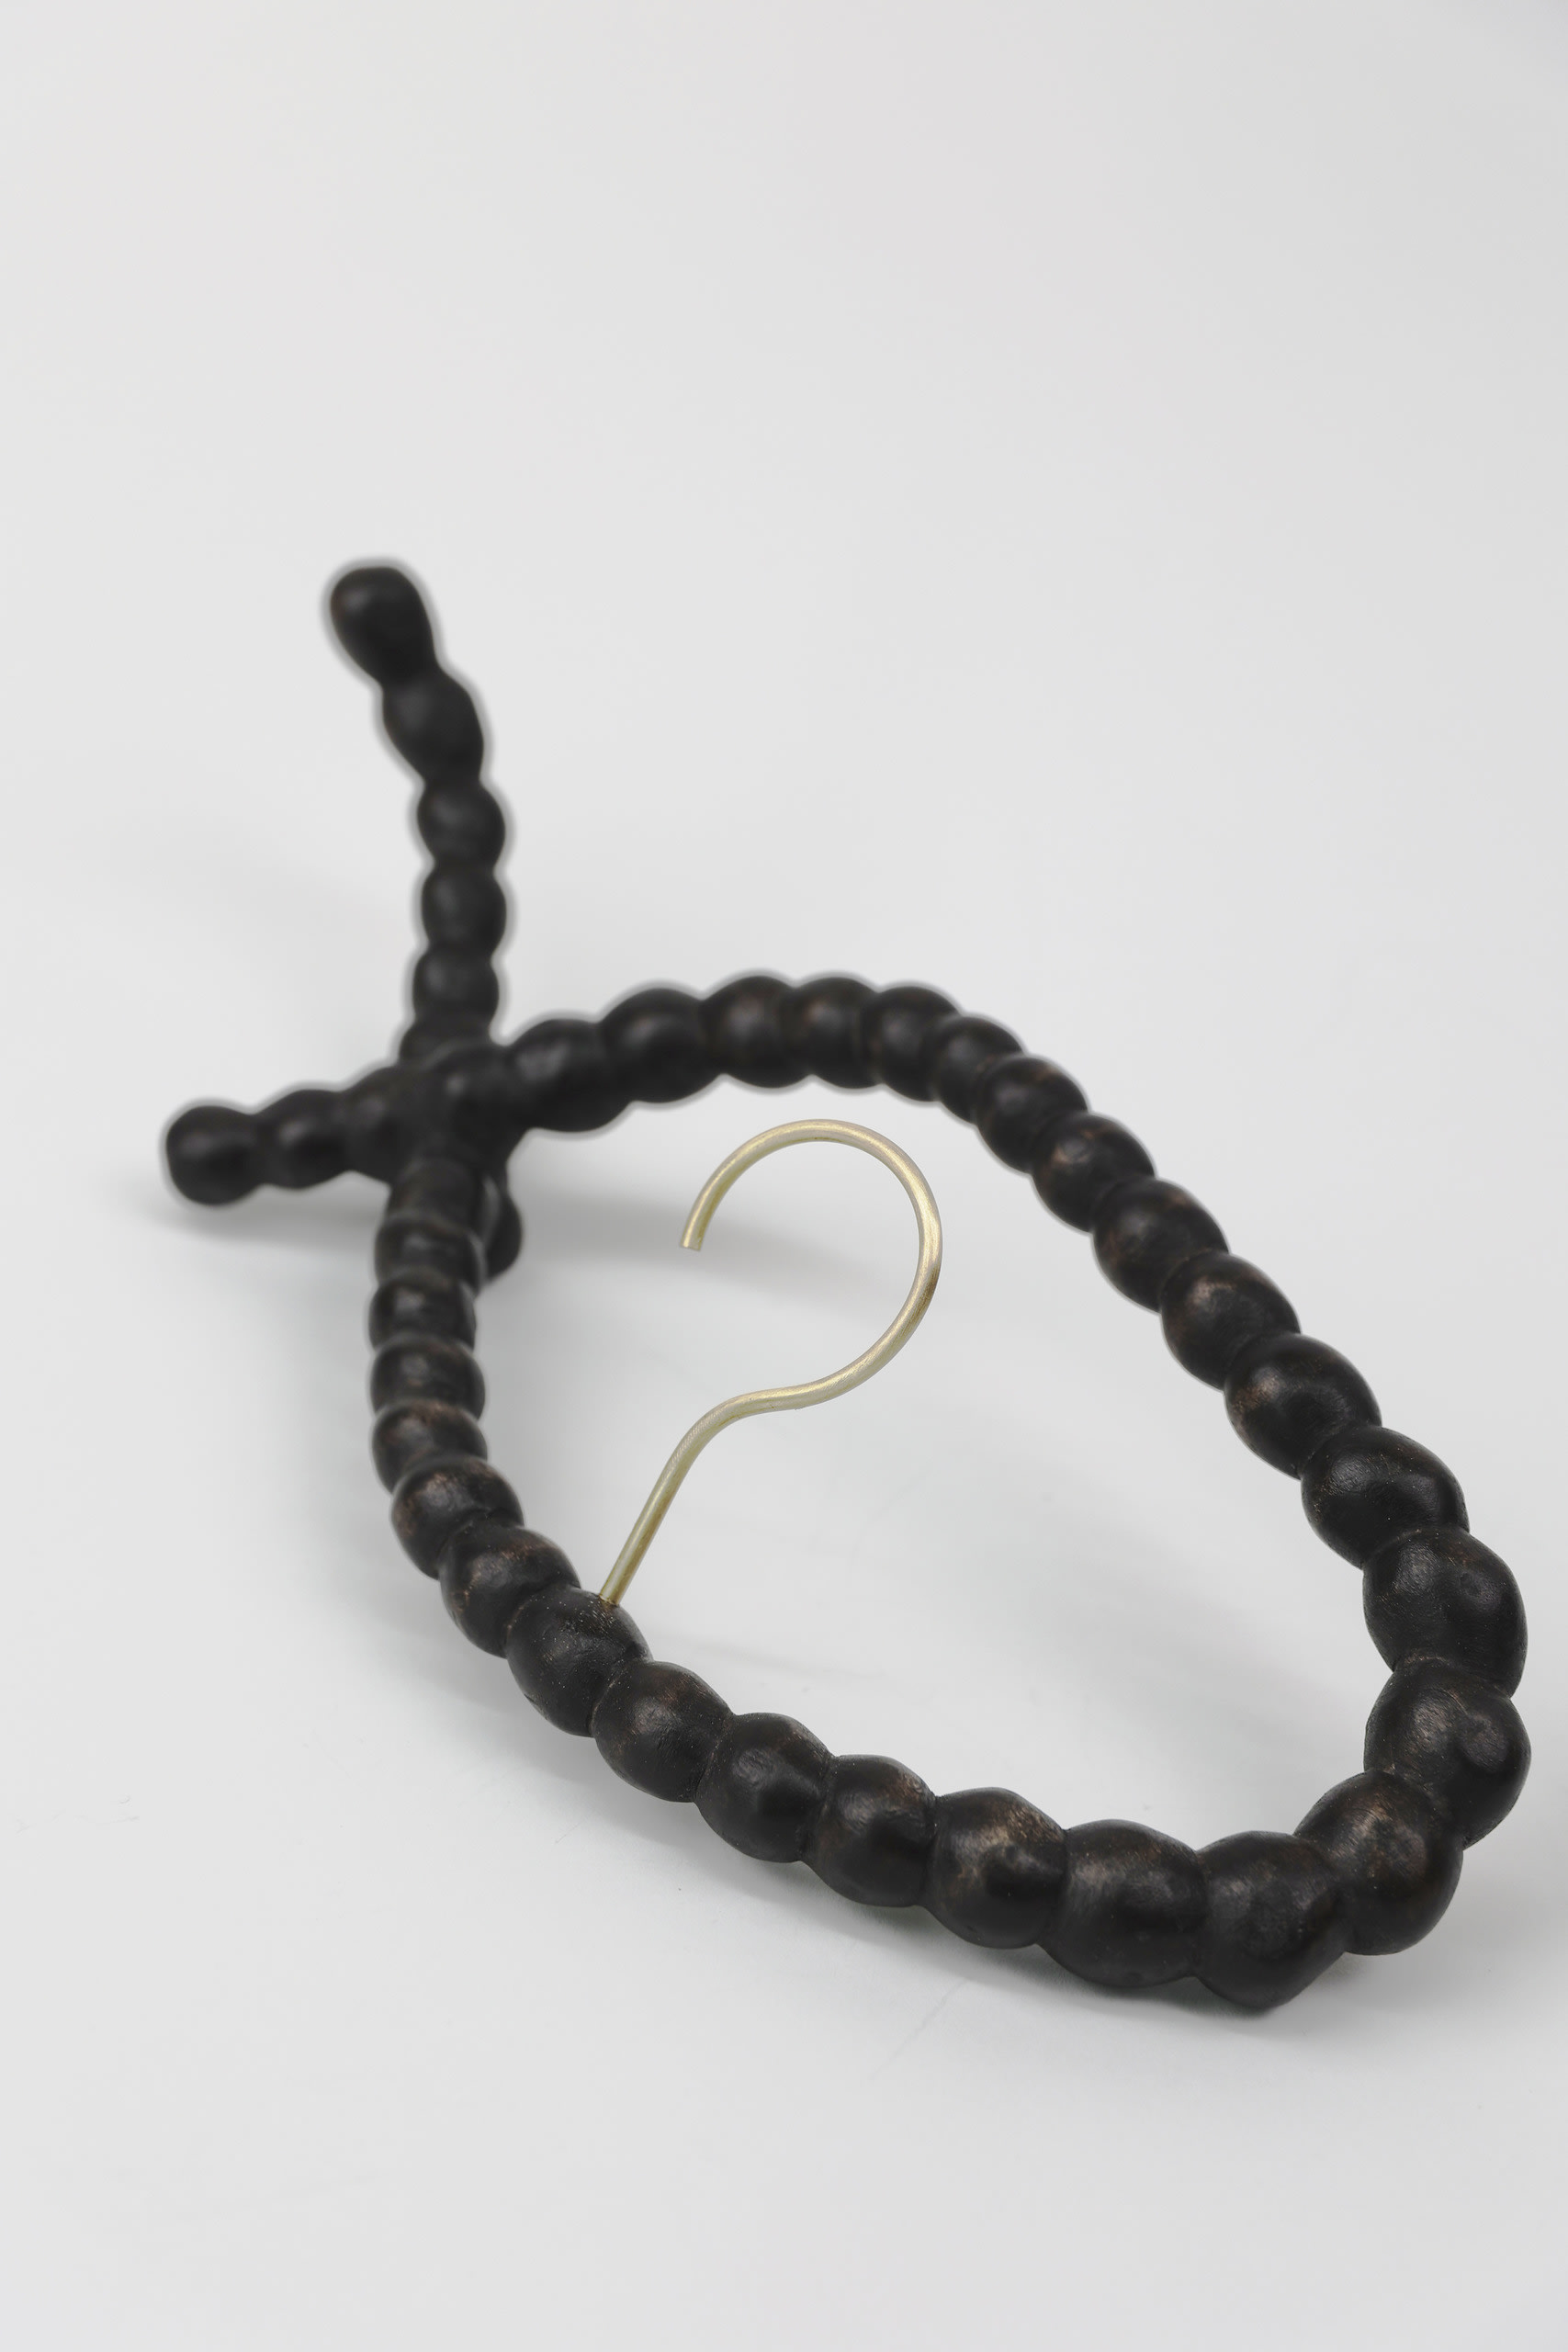 a string of hand-carved wooden pearls with a brass hook set in the middle